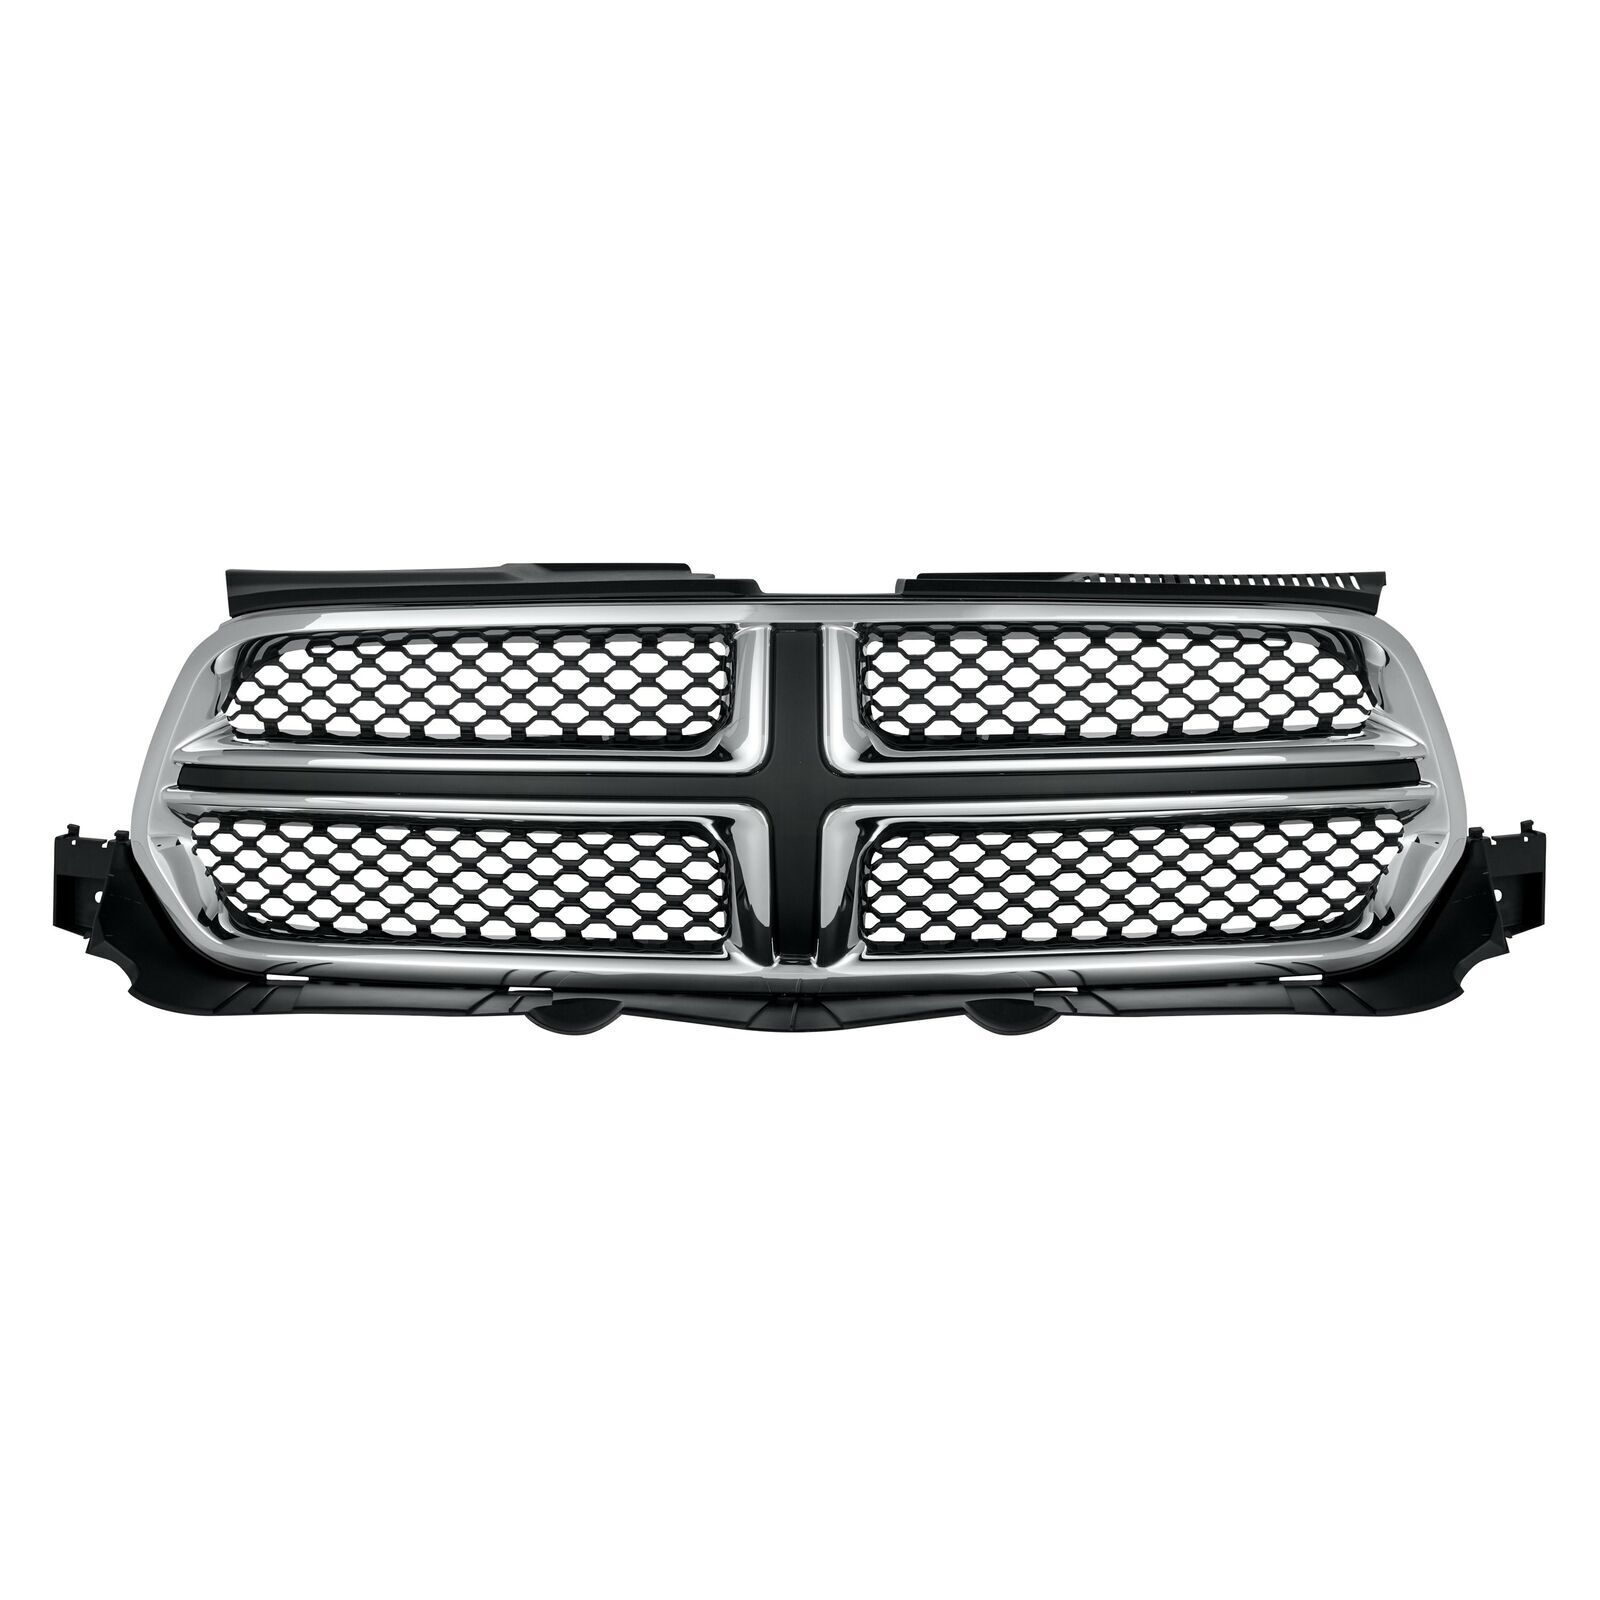 NEW Front Grille For 2011-2013 Dodge Durango SHIPS TODAY